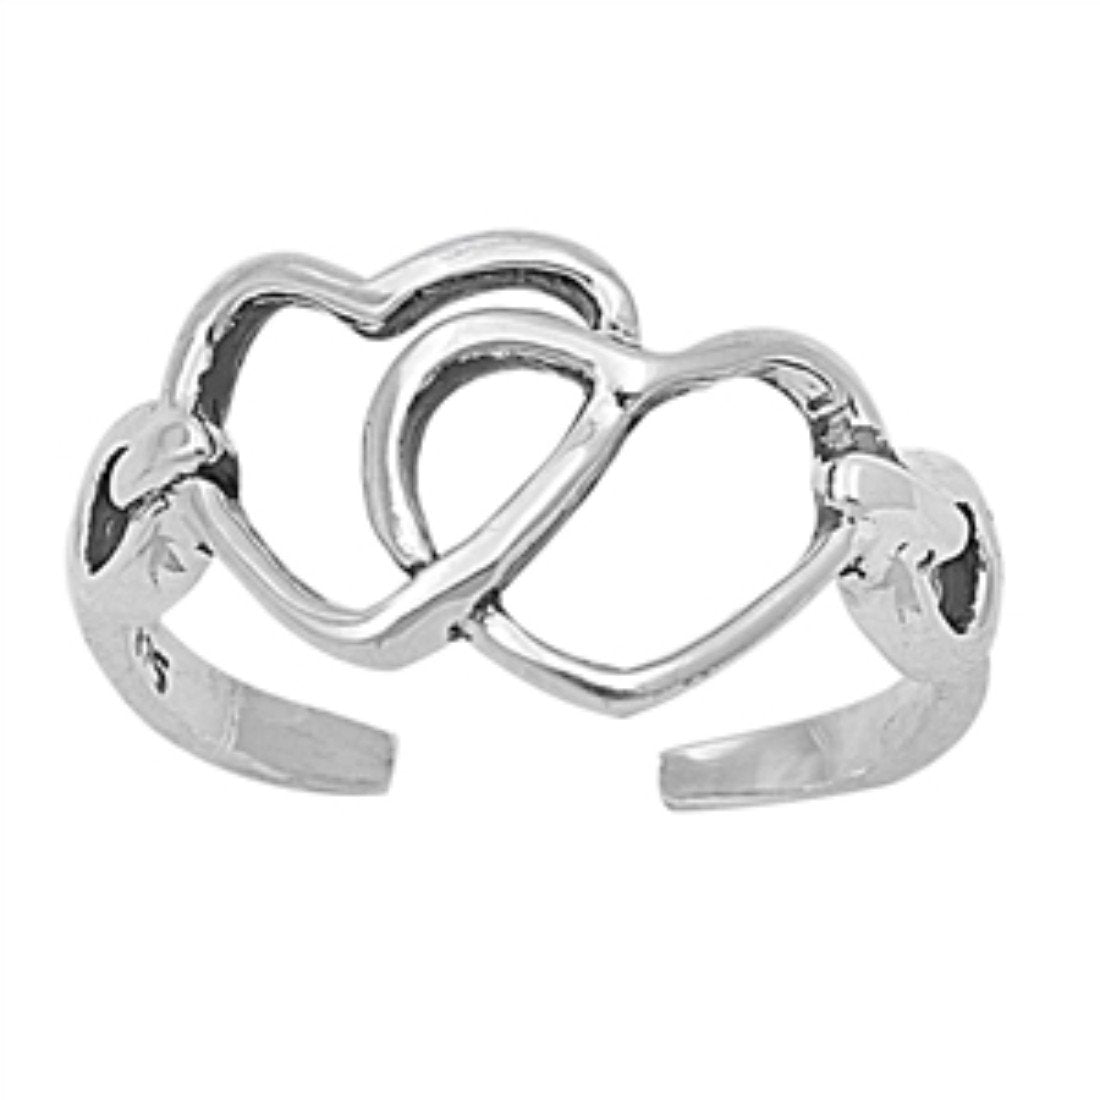 Silver Toe Ring Heart Band Adjustable 925 Sterling Silver (8mm)